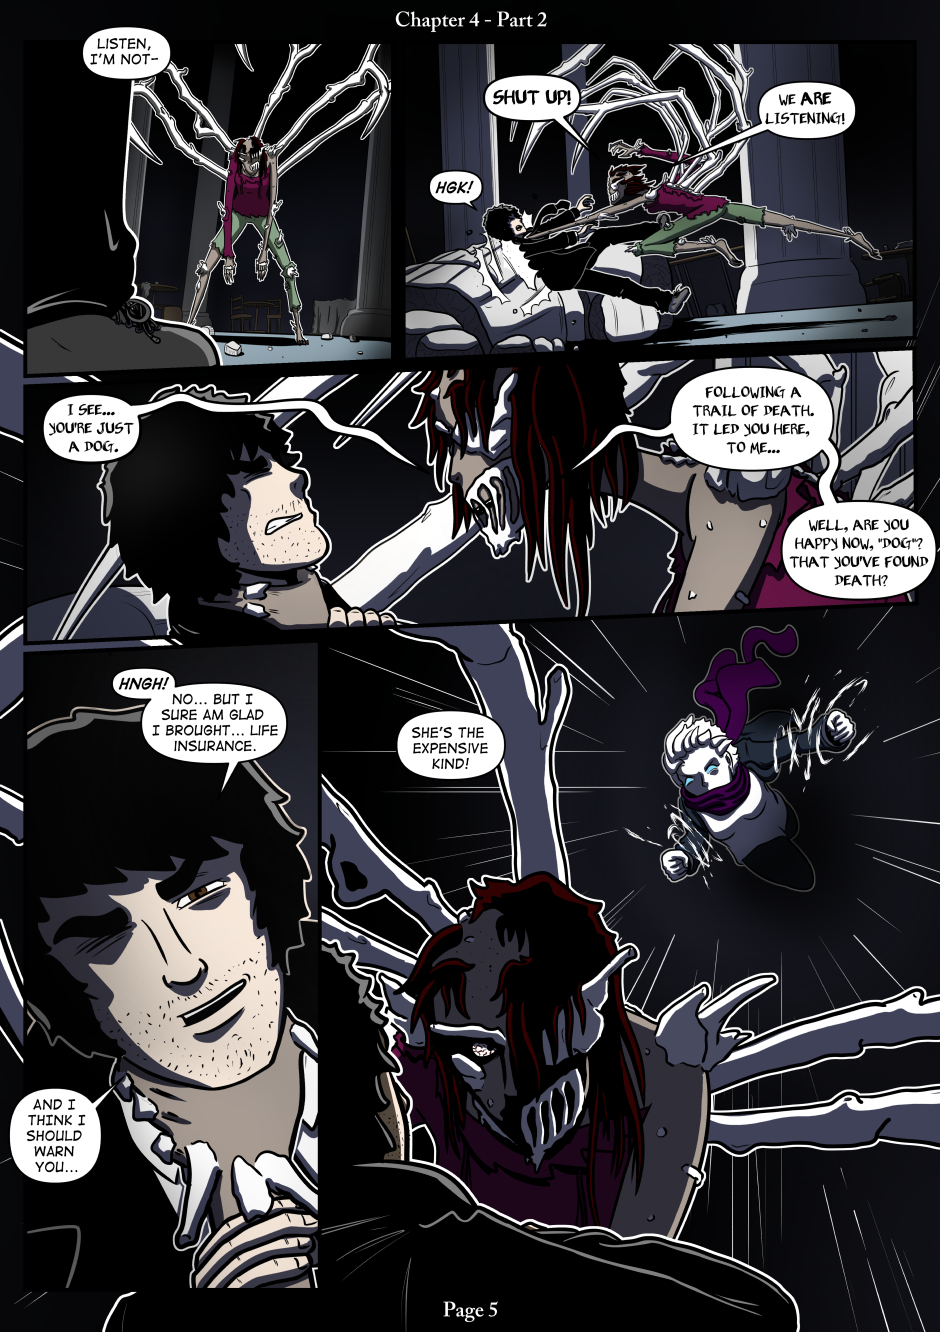 Chapter 4 - Part 2, Page 5